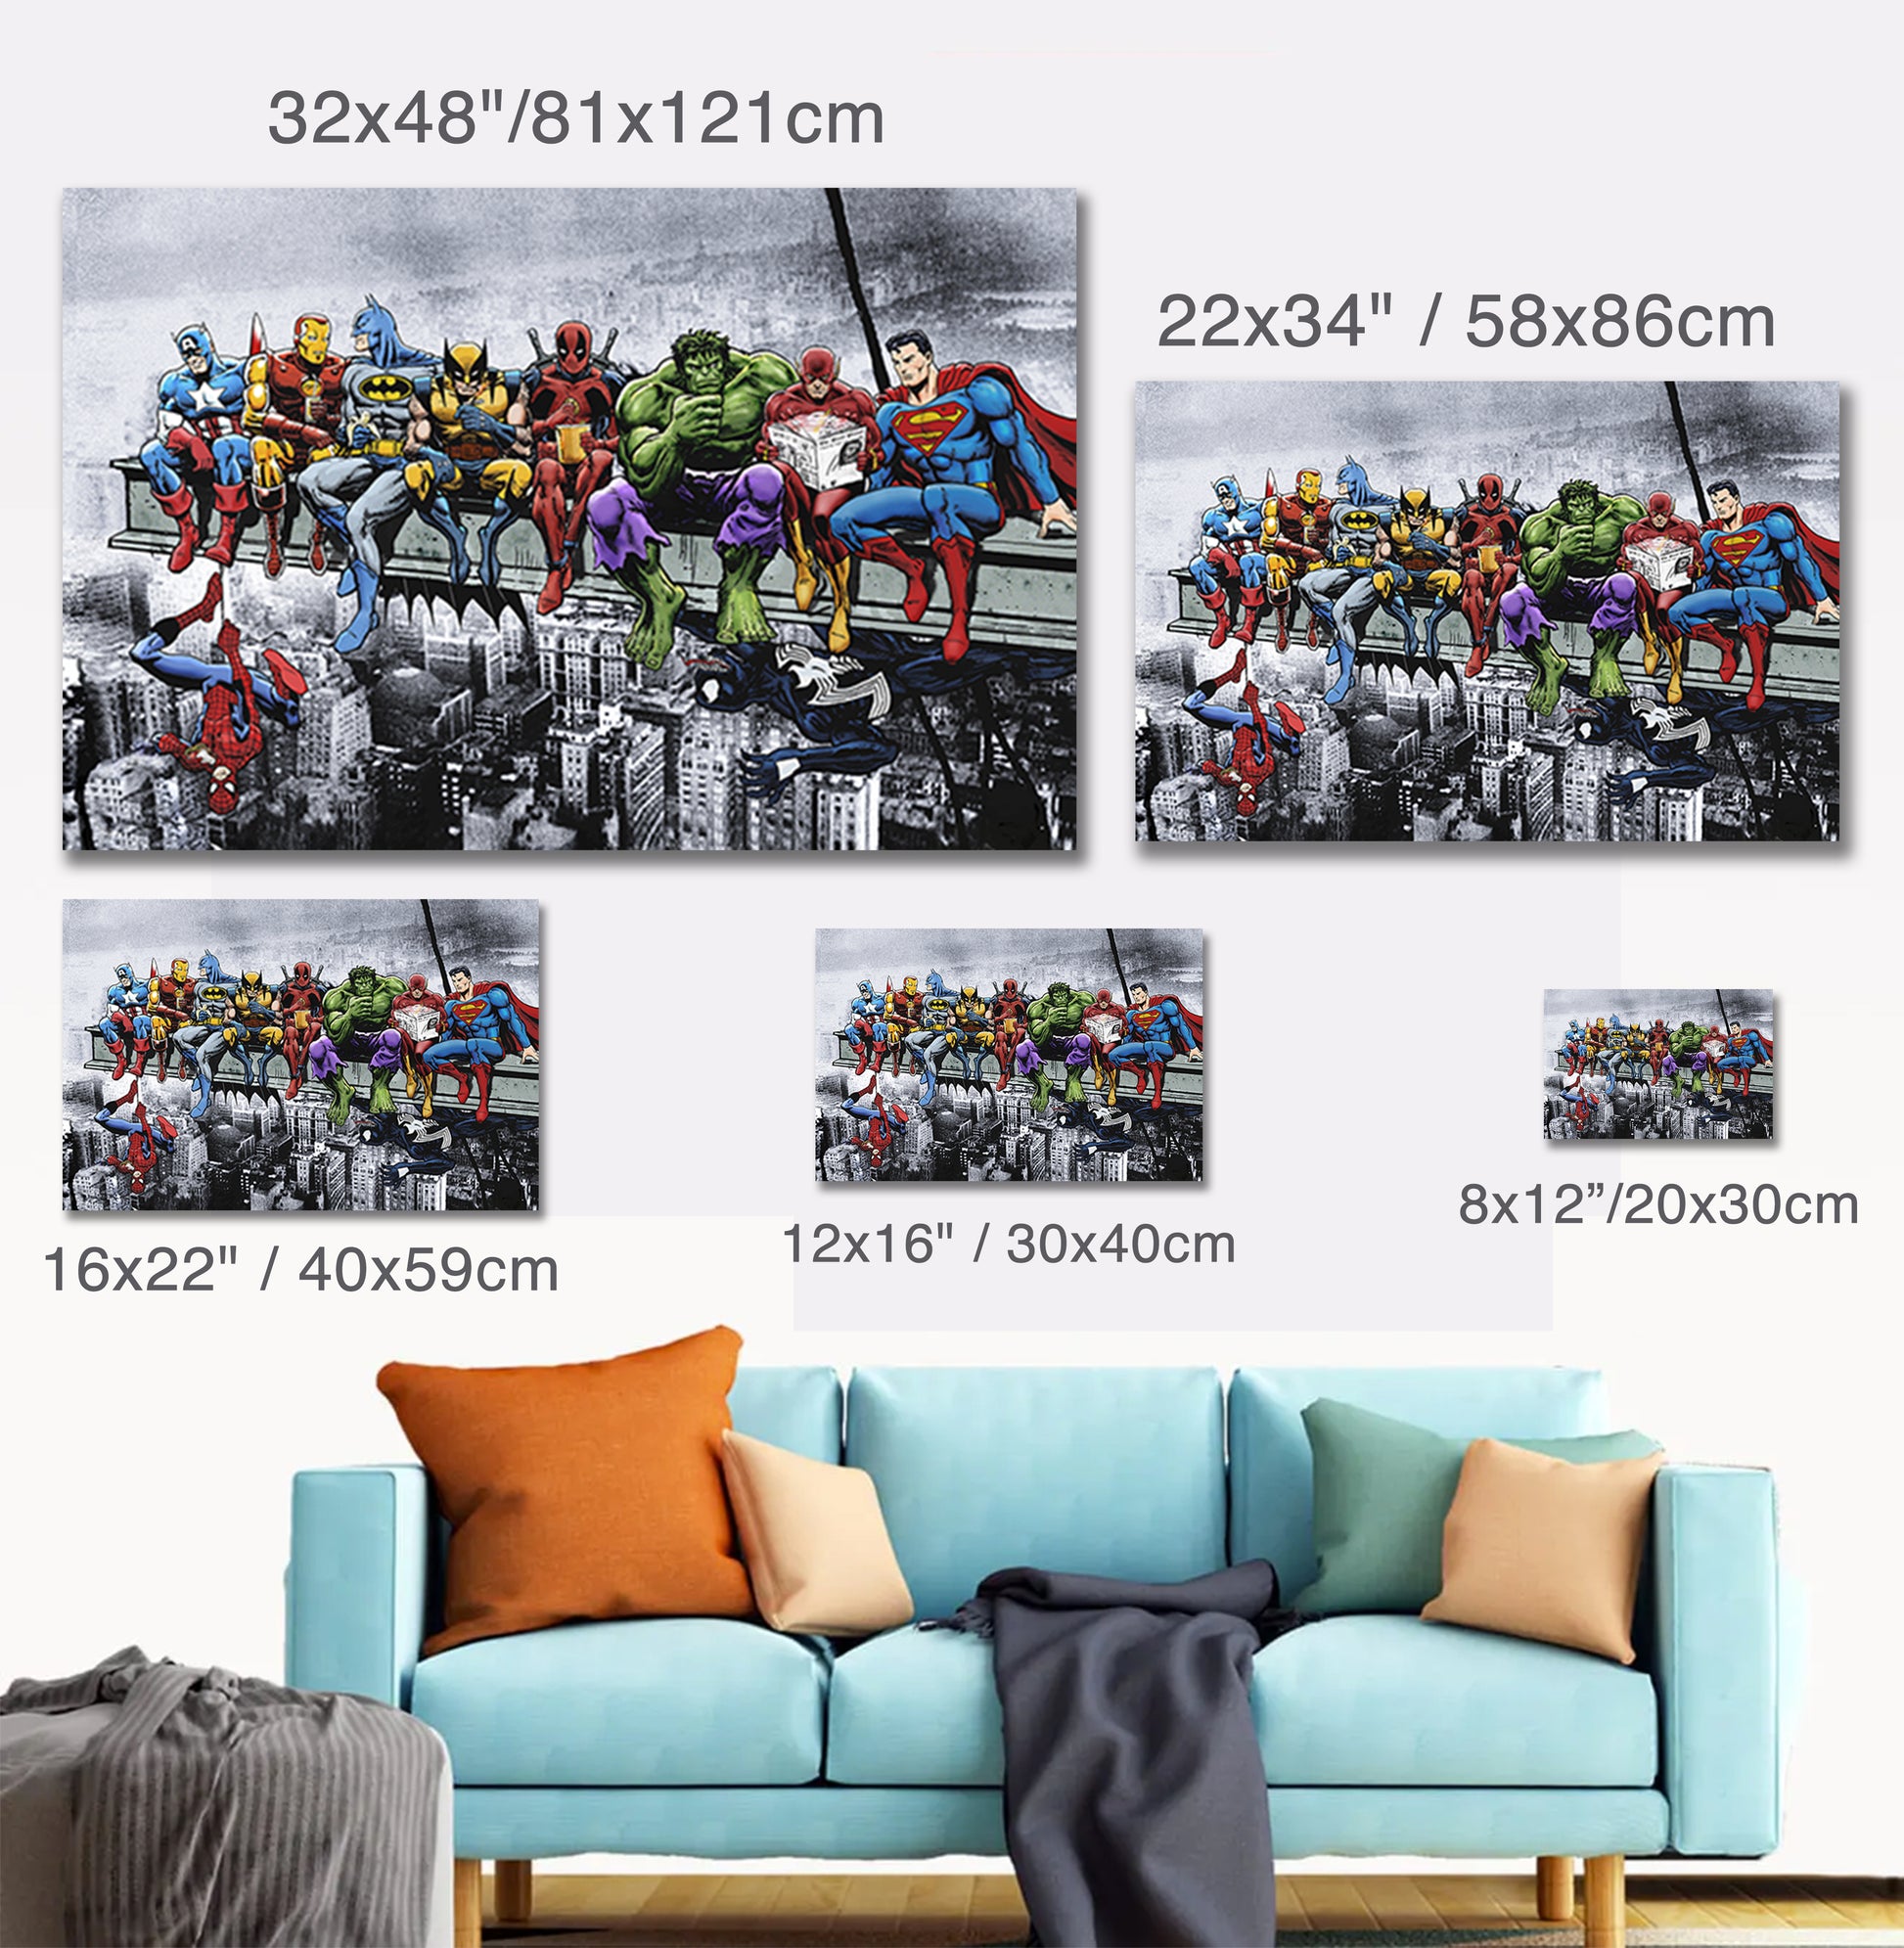 various sizes of Marvel Superhero Lunch mounted canvases